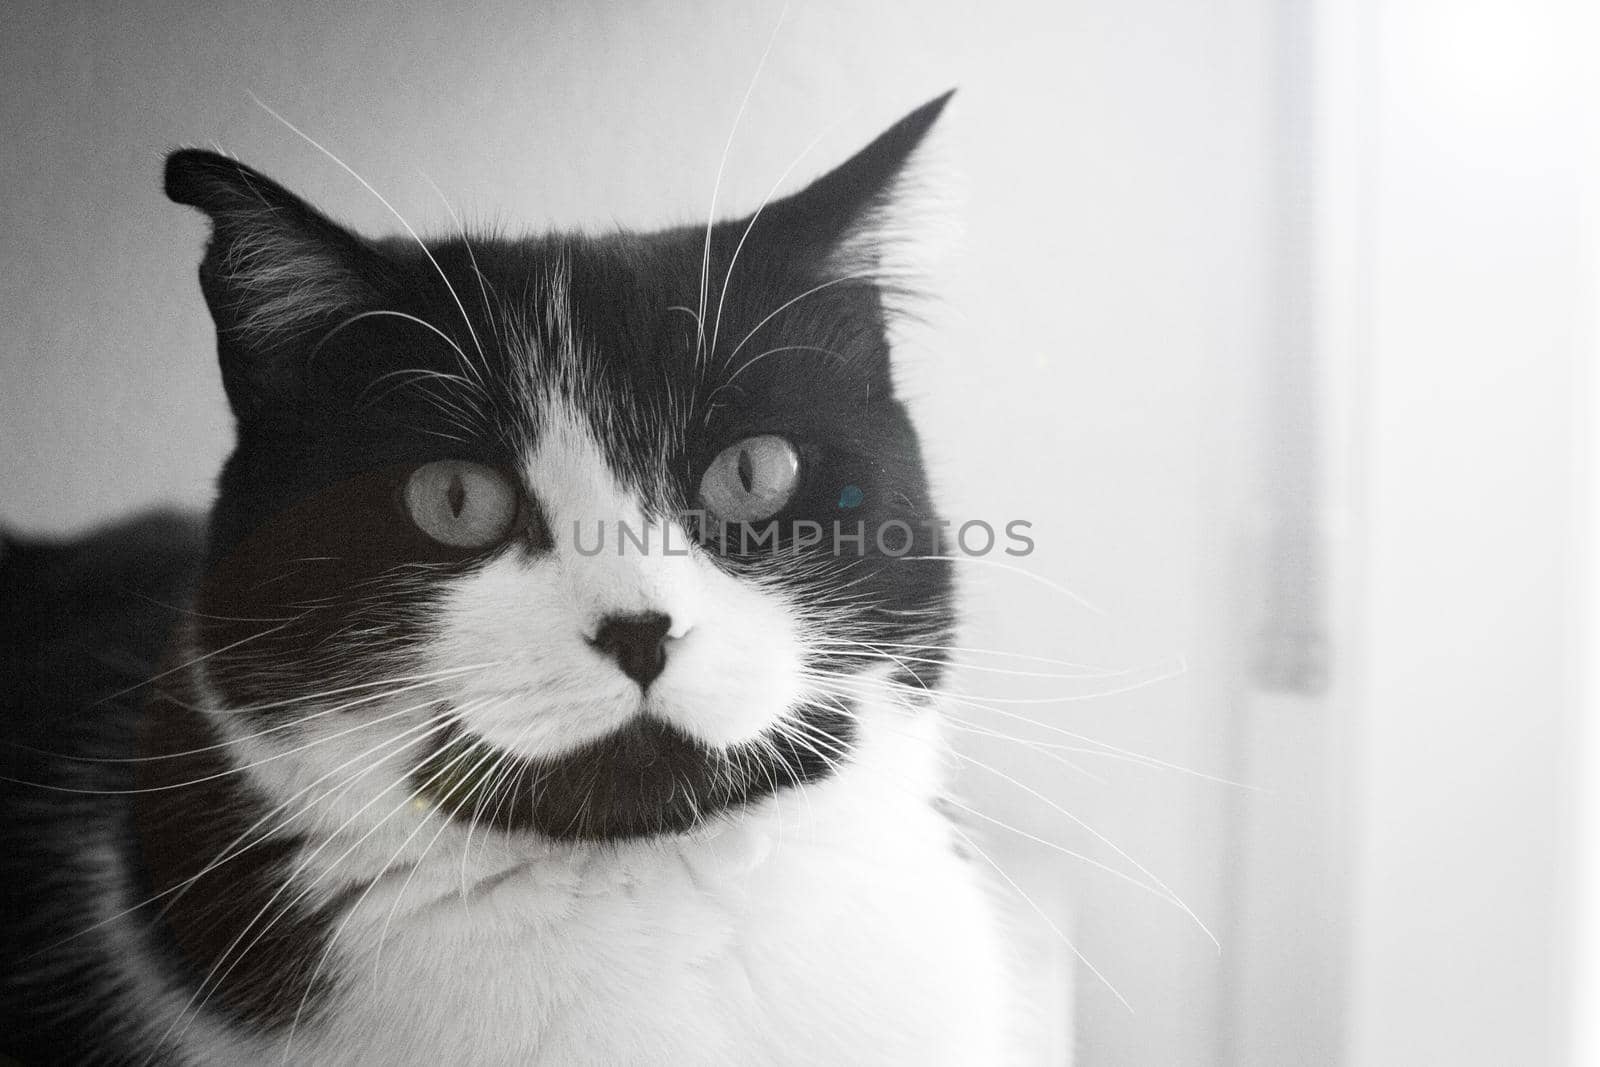 Immunodeficient black and white cat portrait. Relaxing